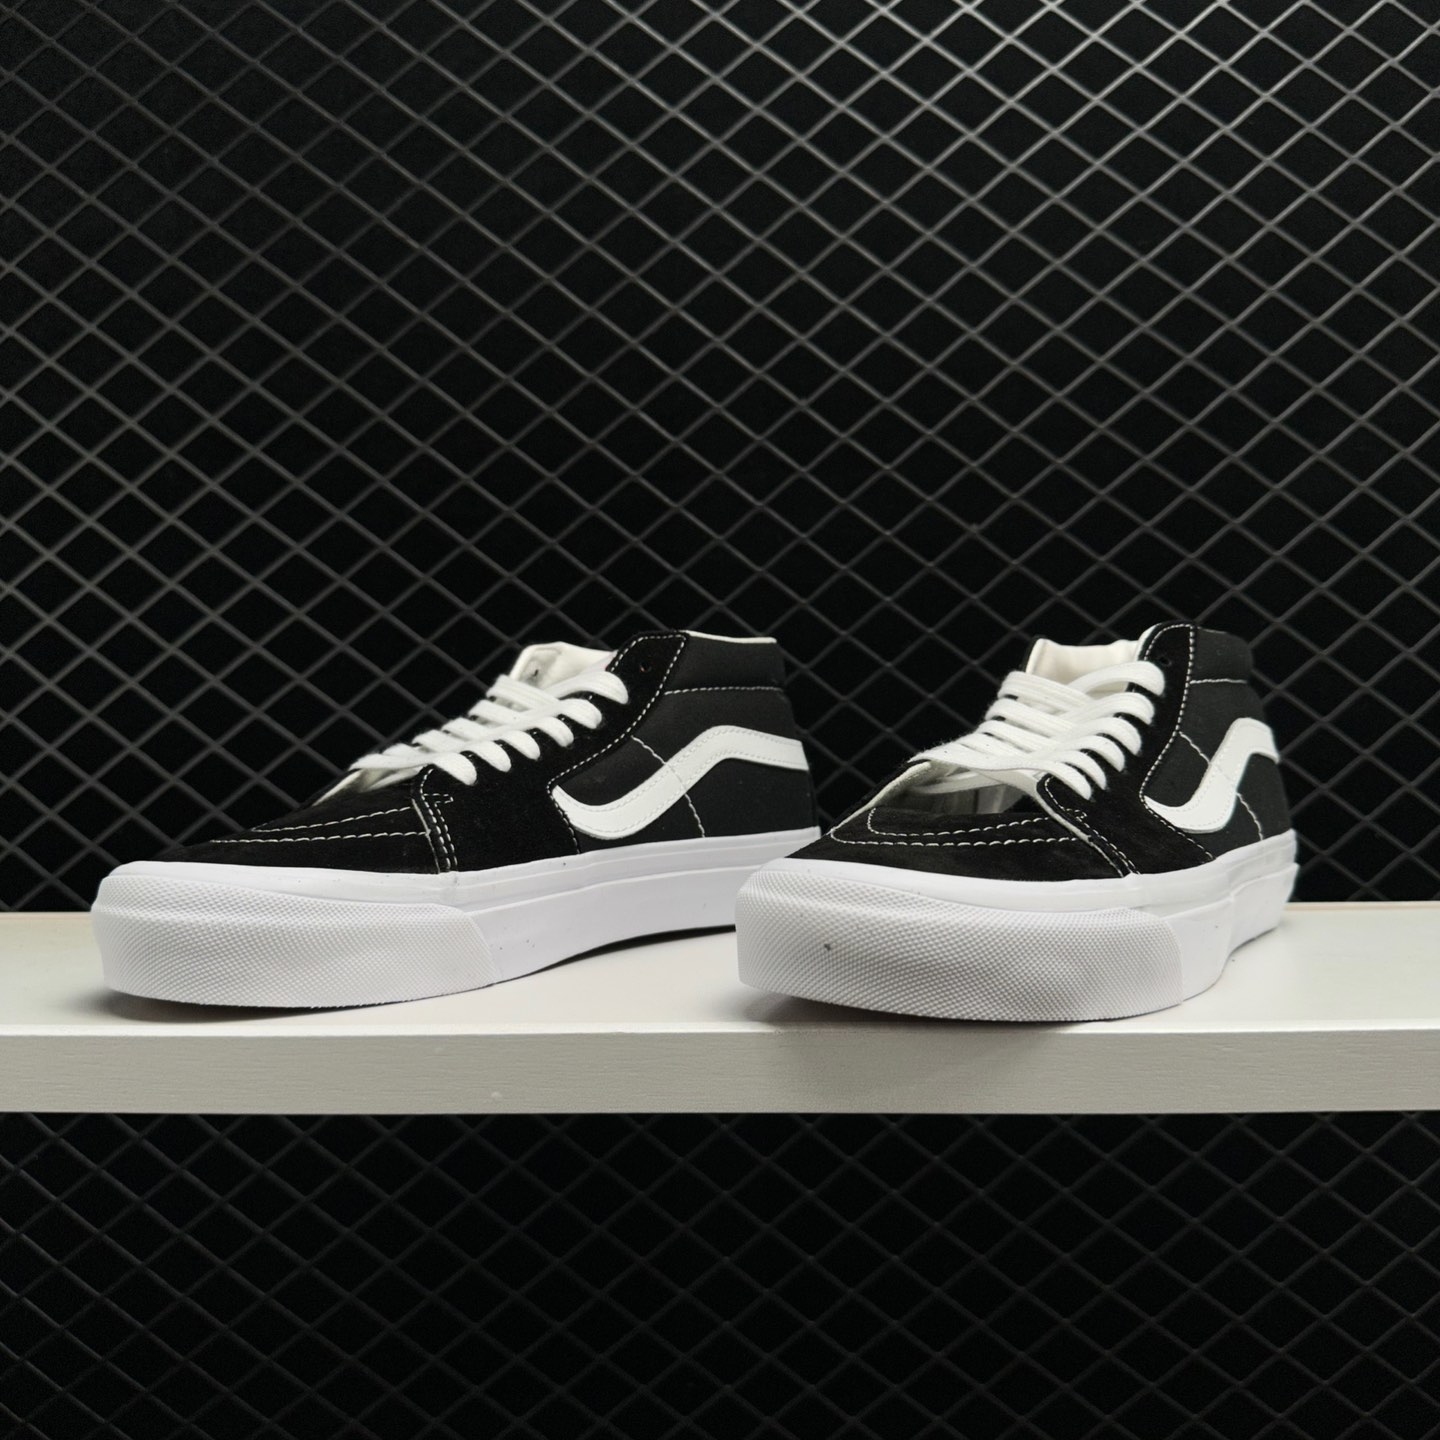 Vans Vaults Sk8-Mid OG LX 'Black White' VN0A4BVCBA2 - Classic Style and Quality